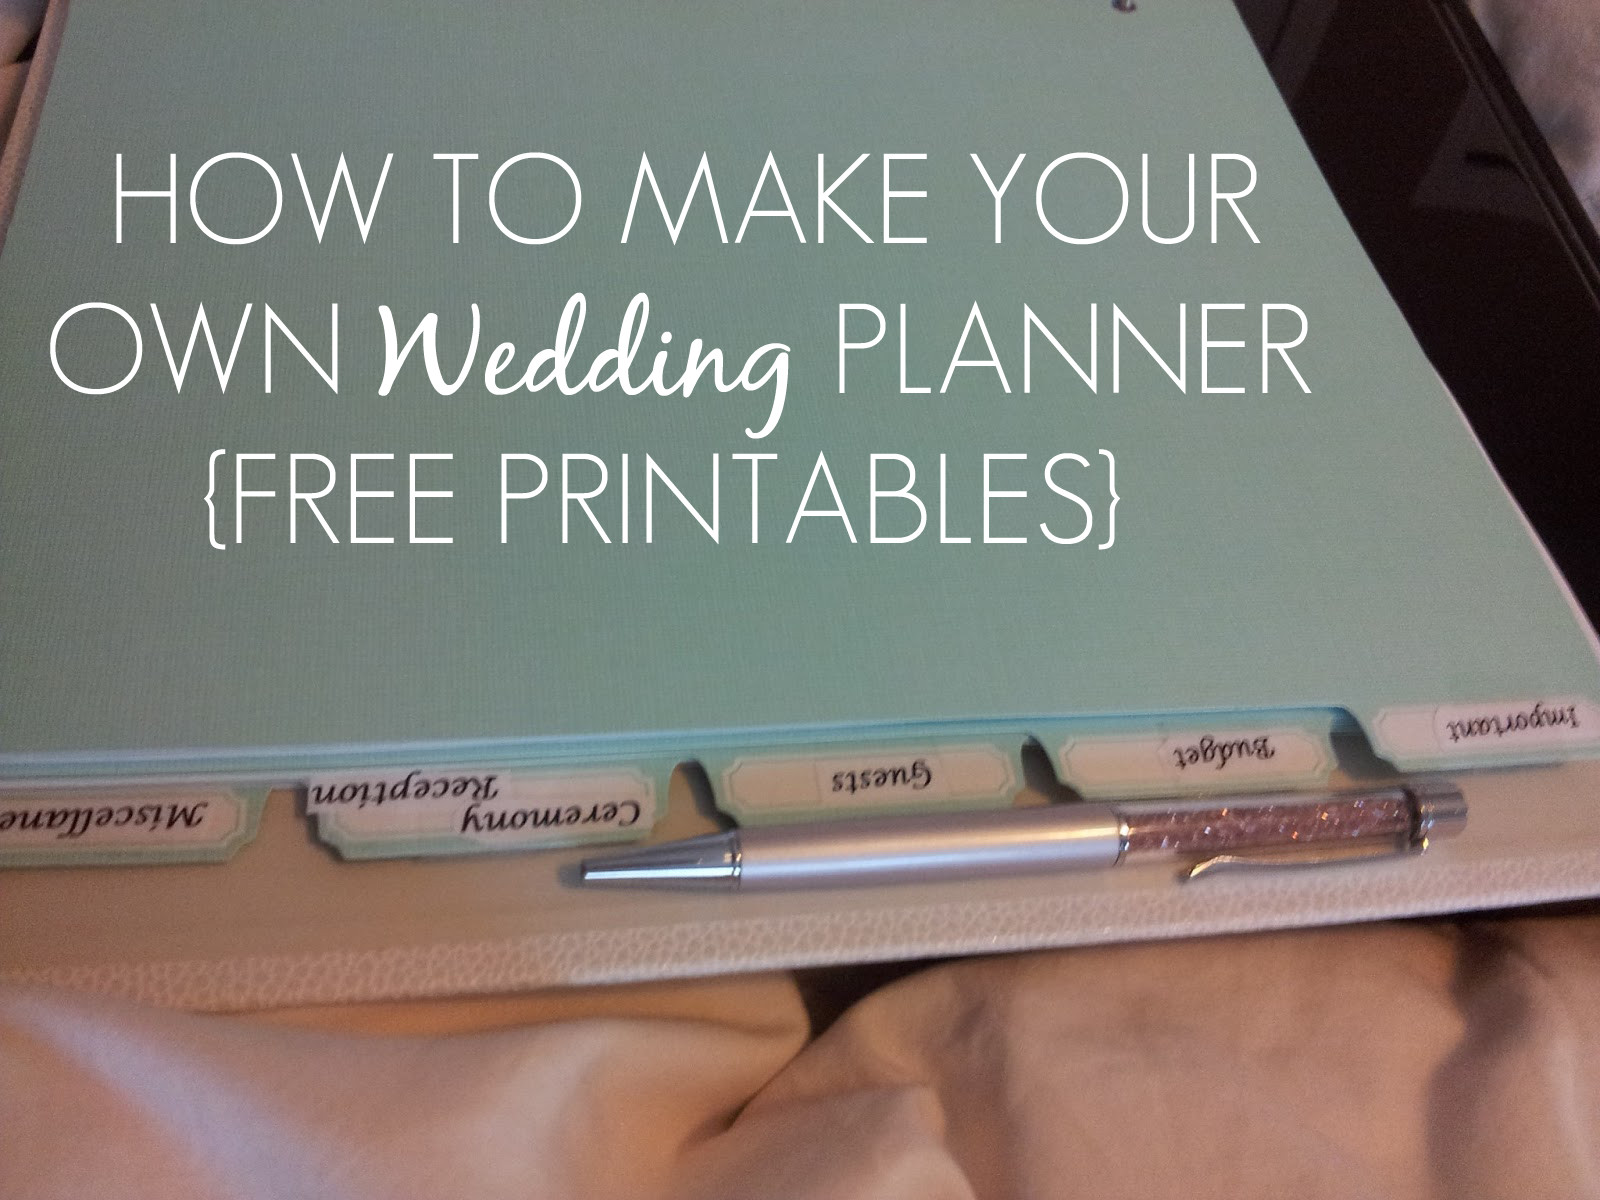 DIY Wedding Planner Printables
 Sleepless in DIY Bride Country How to make your own